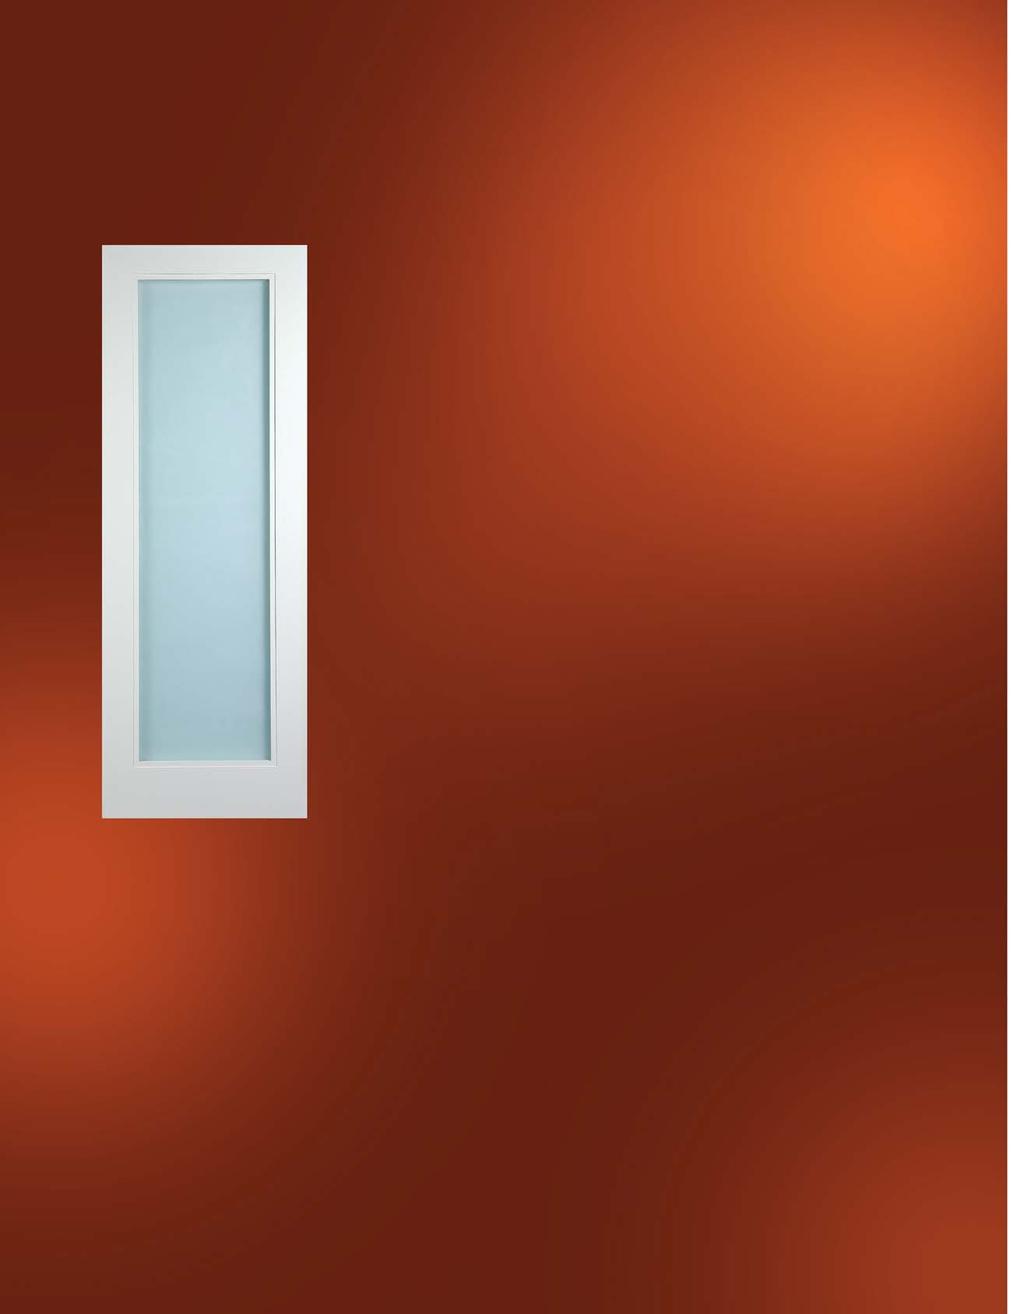 GLASS DOORS G1000 G1010 G2000 G3000 G4000 G1000 with Acid Etched Frosted Glass Standard Glass Options G5000 G10 G15 ı/4" Clear Tempered ı/4" Tempered Frosted ı/4" White Laminated ı/4" Mirror We also